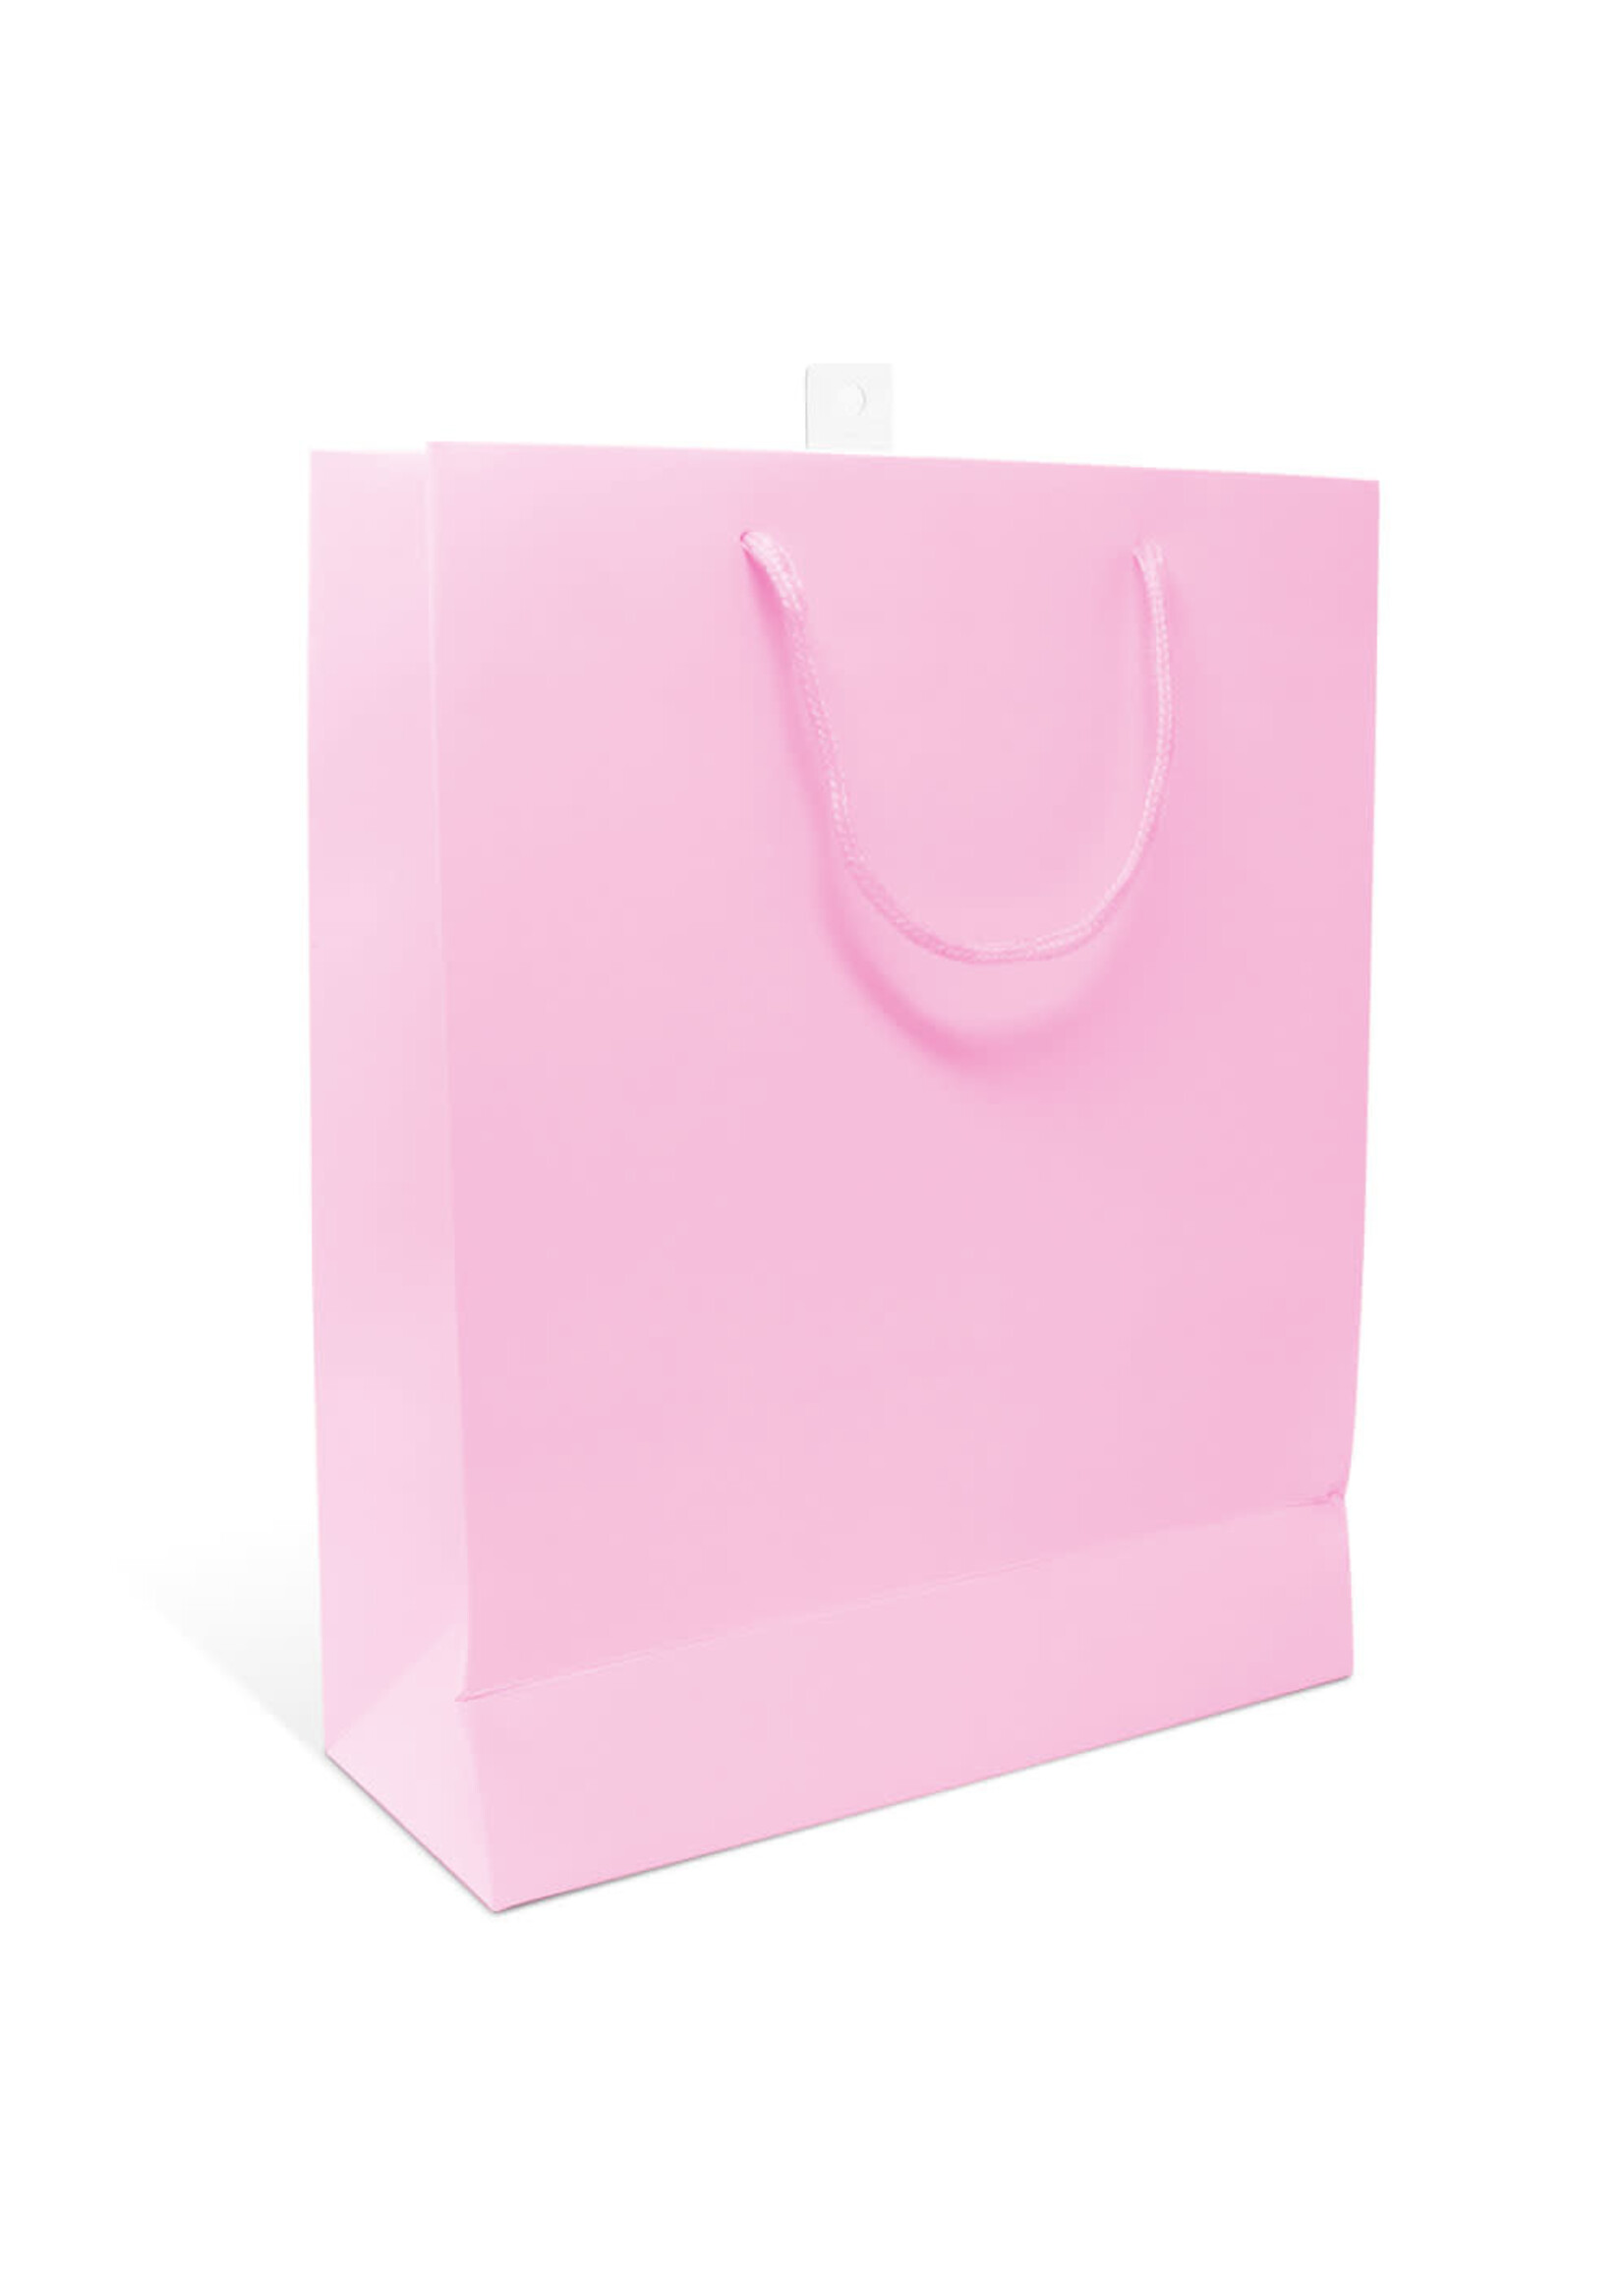 SOLID BABY PINK GIFT BAGS LARGE 12" X 16.5" X 4.75"